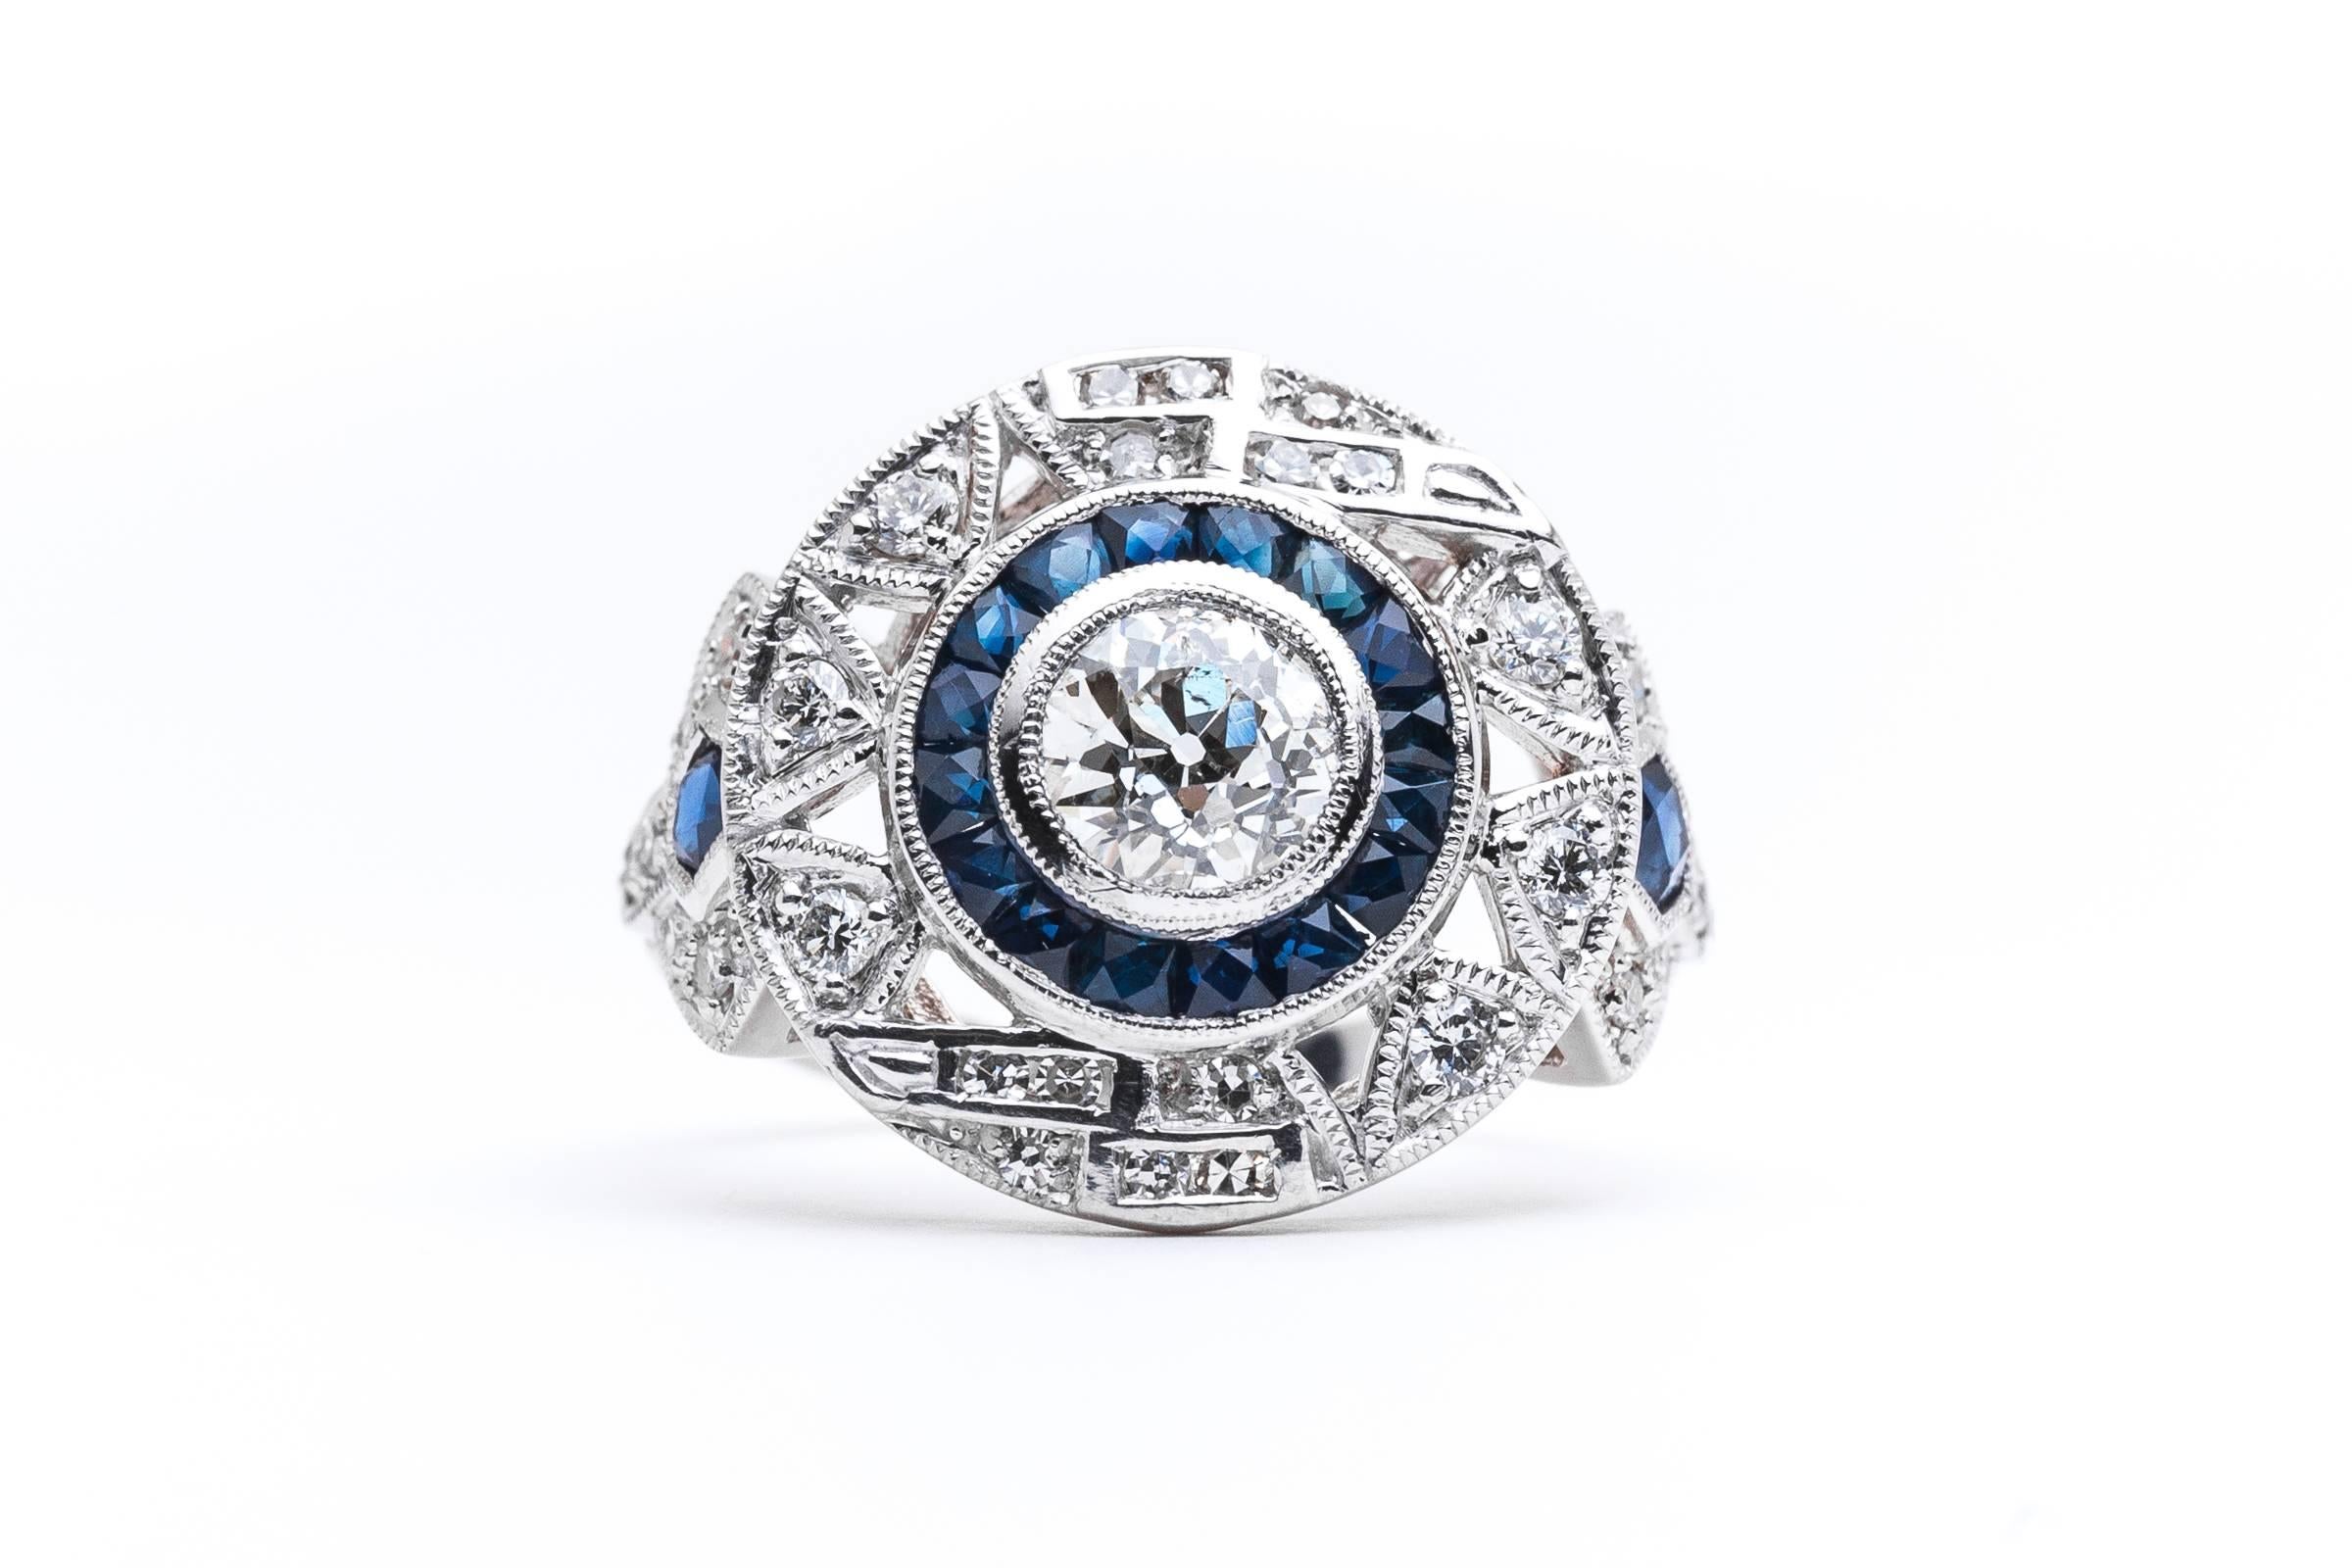 A dramatic handmade diamond and sapphire target style ring in luxurious platinum. Centered by a sparkling old European cut diamond encircled by sapphires, this ring features a variety of geometric shapes in a classic art deco style.

Grading as